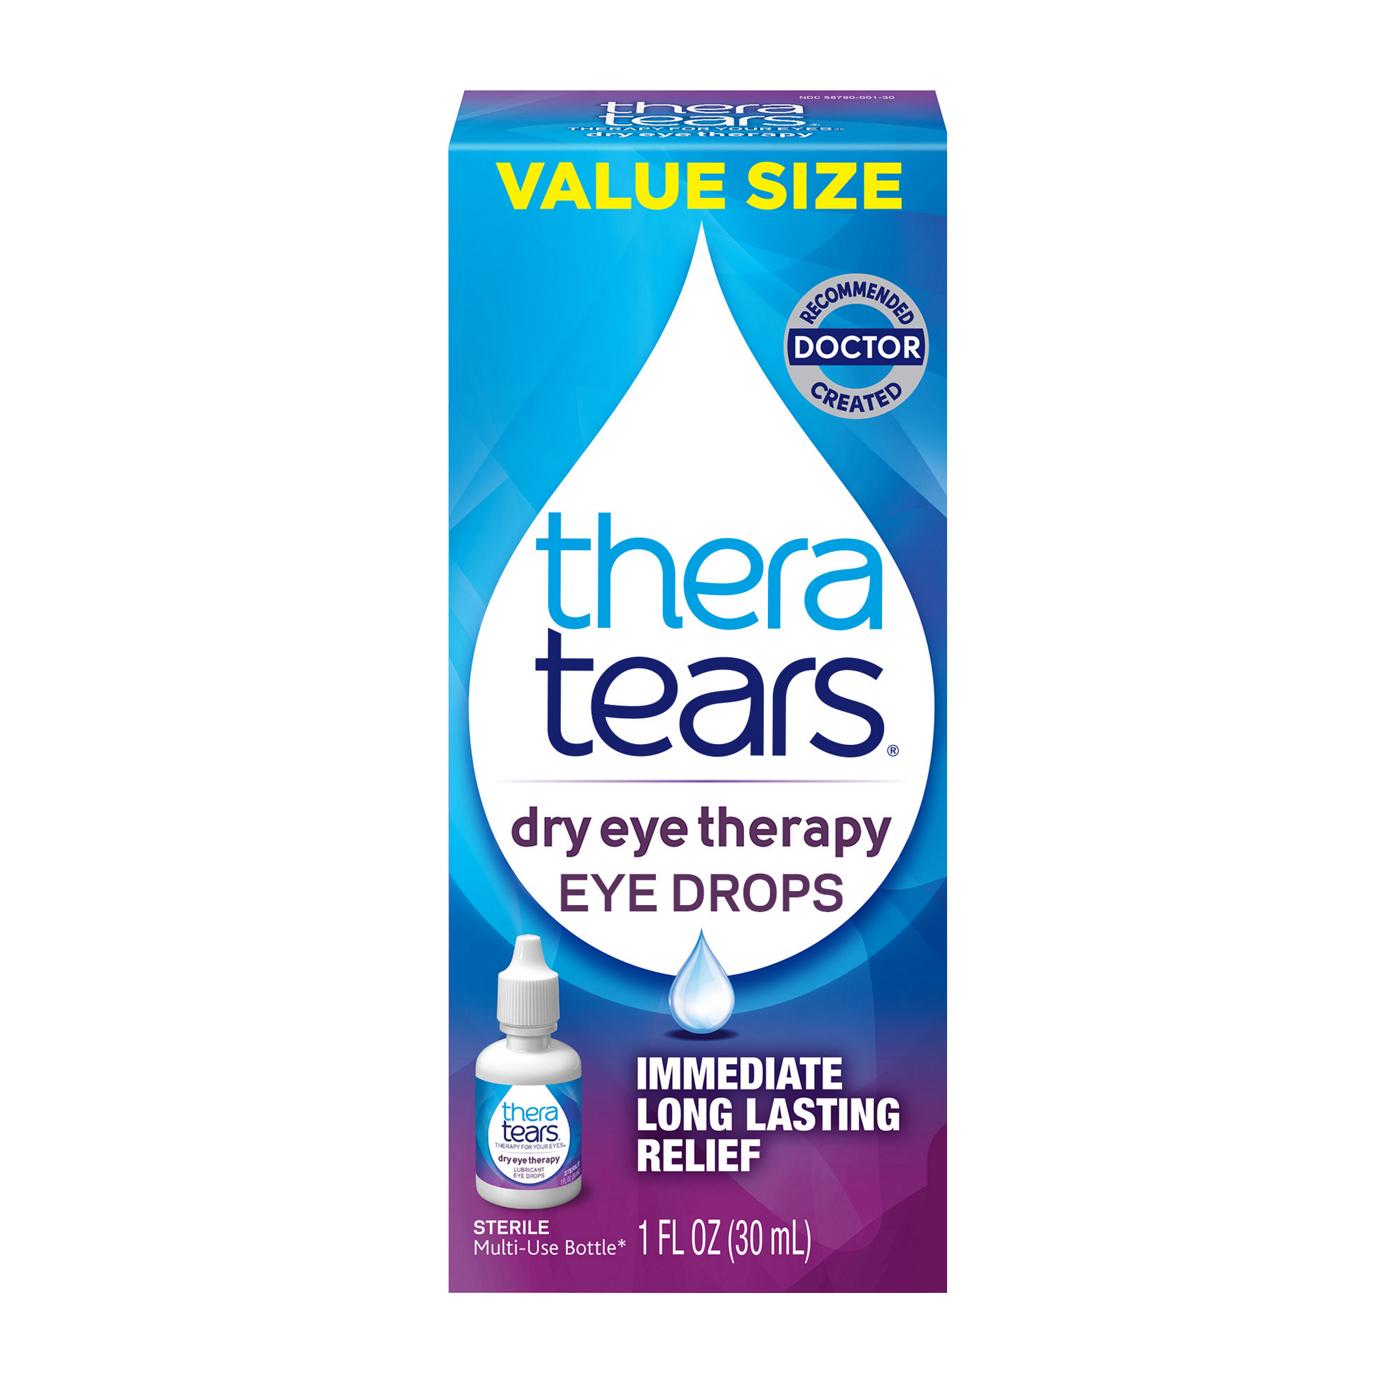 TheraTears Dry Eye Drops; image 1 of 5